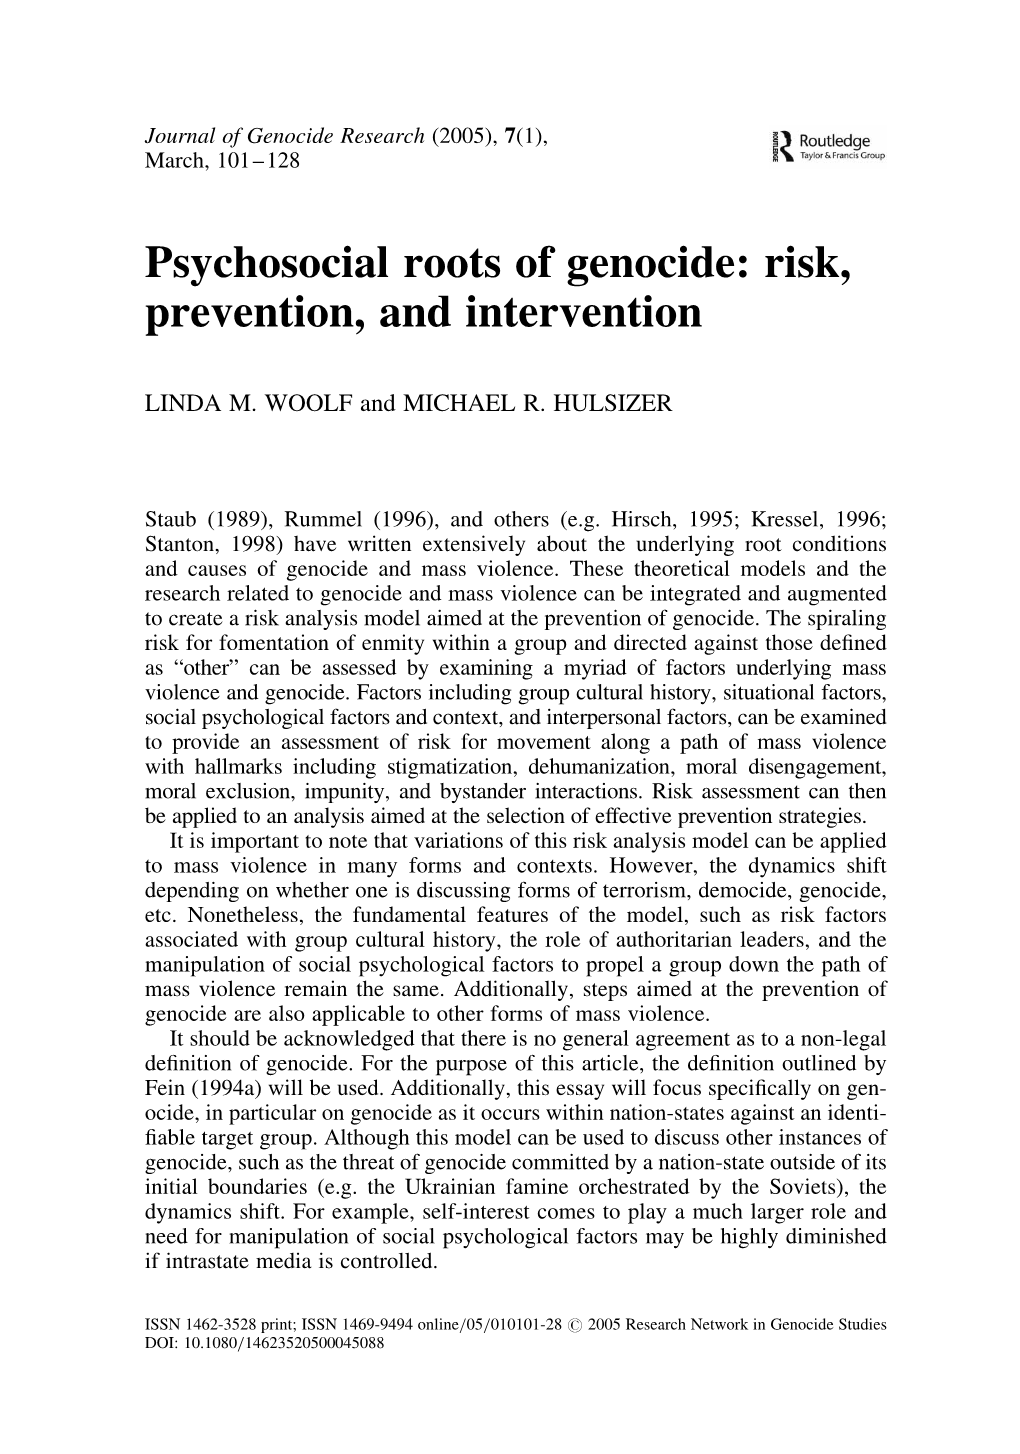 Psychosocial Roots of Genocide: Risk, Prevention, and Intervention